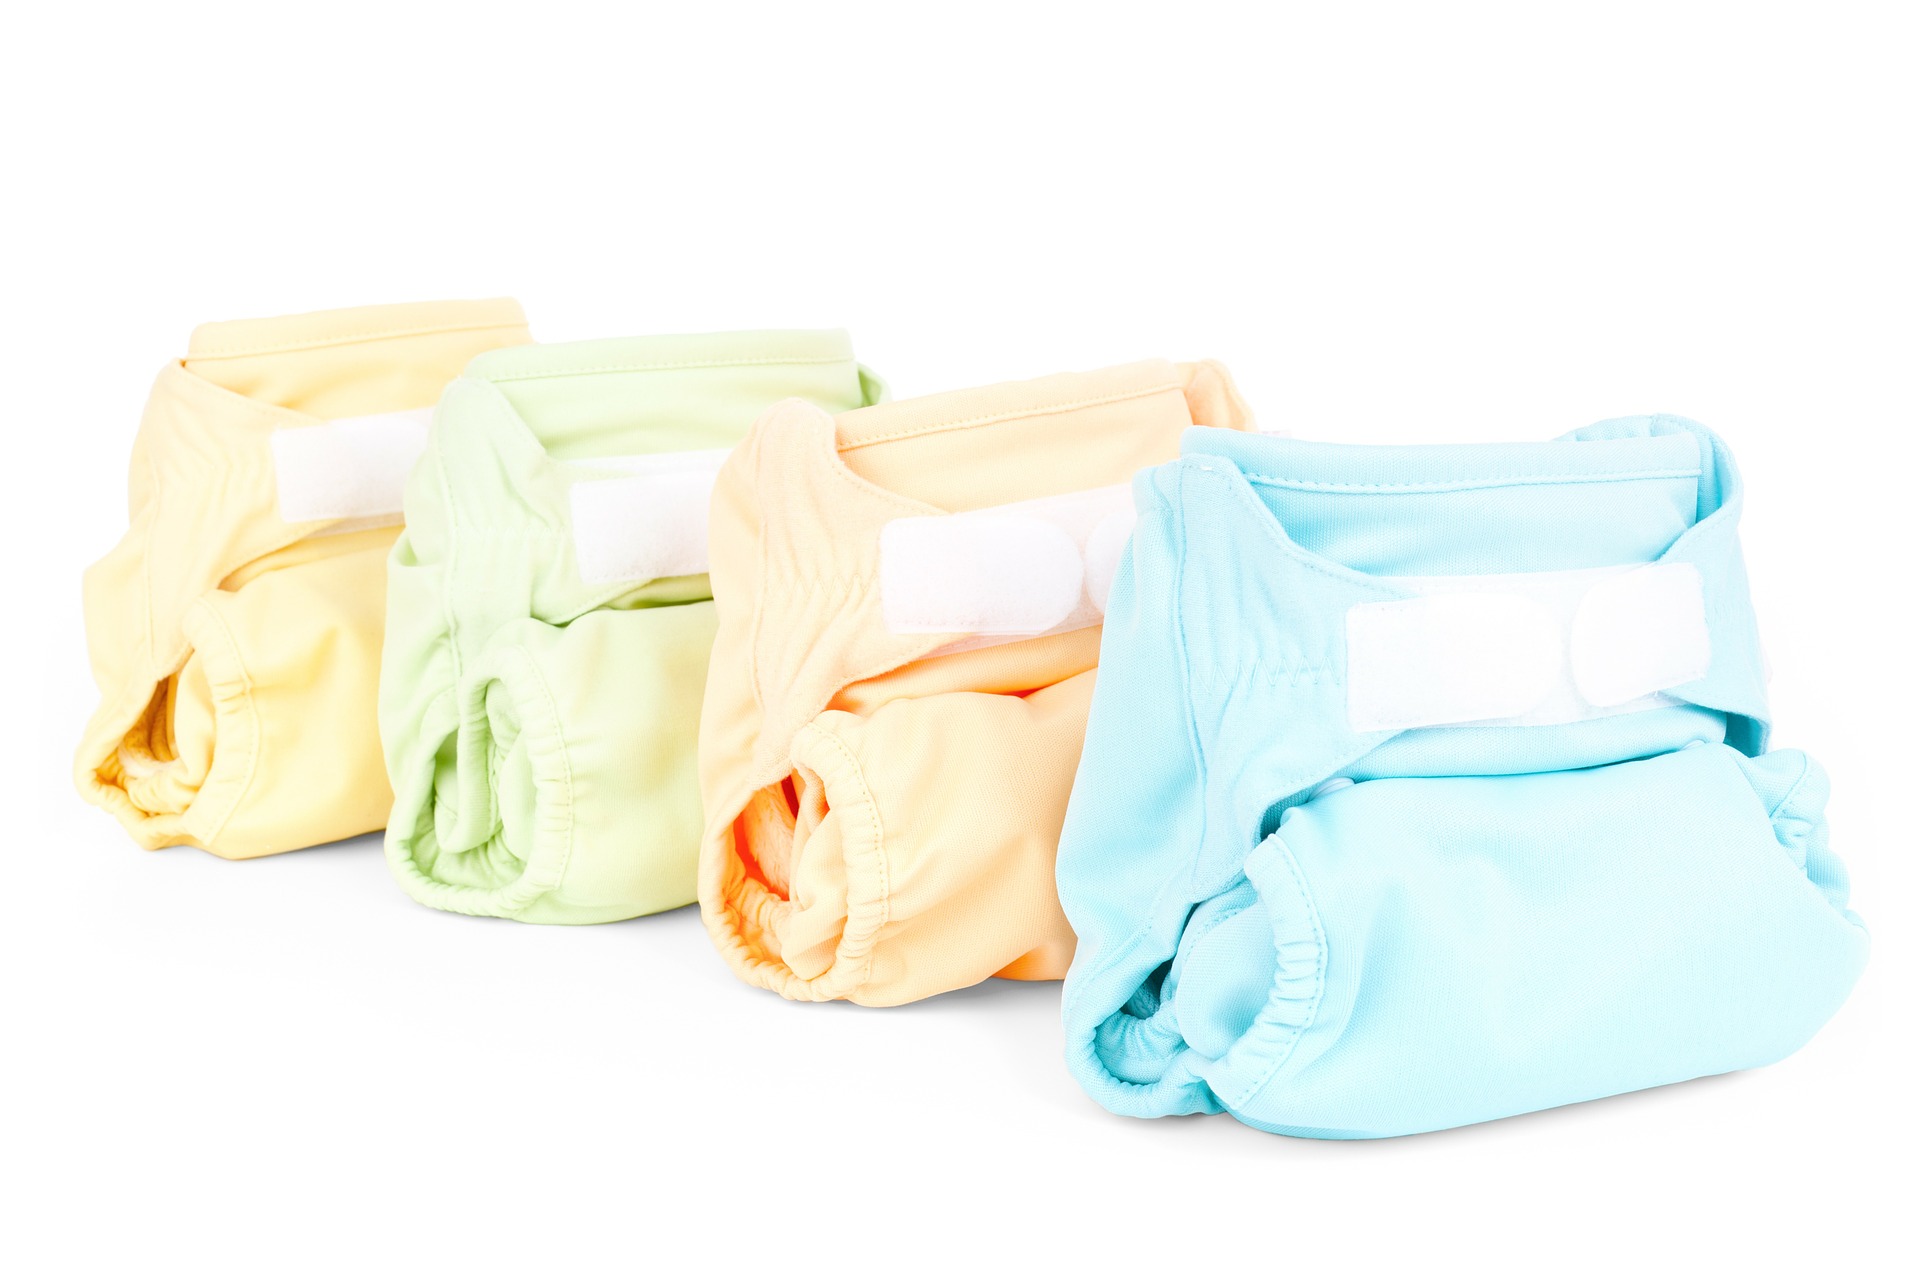 Consulting for reusable diapers introduction at household level in Donostia